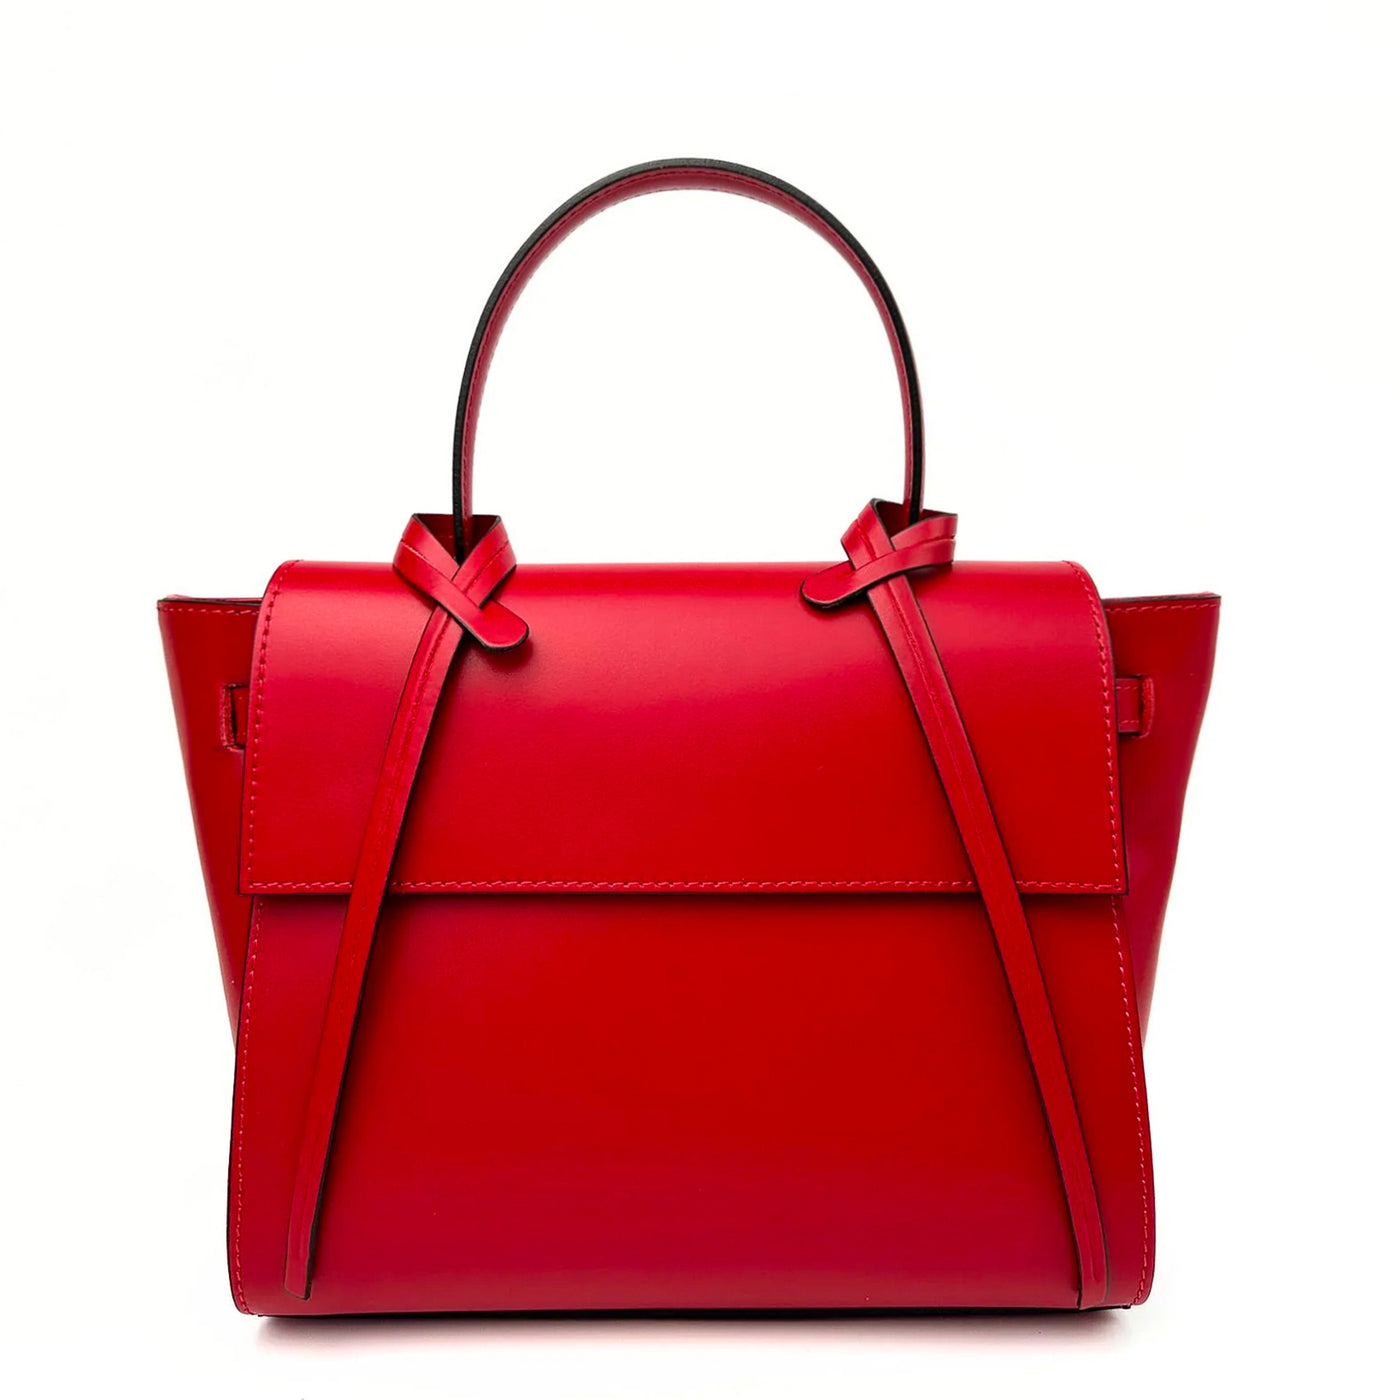 Leather bag "Arezzo", Red